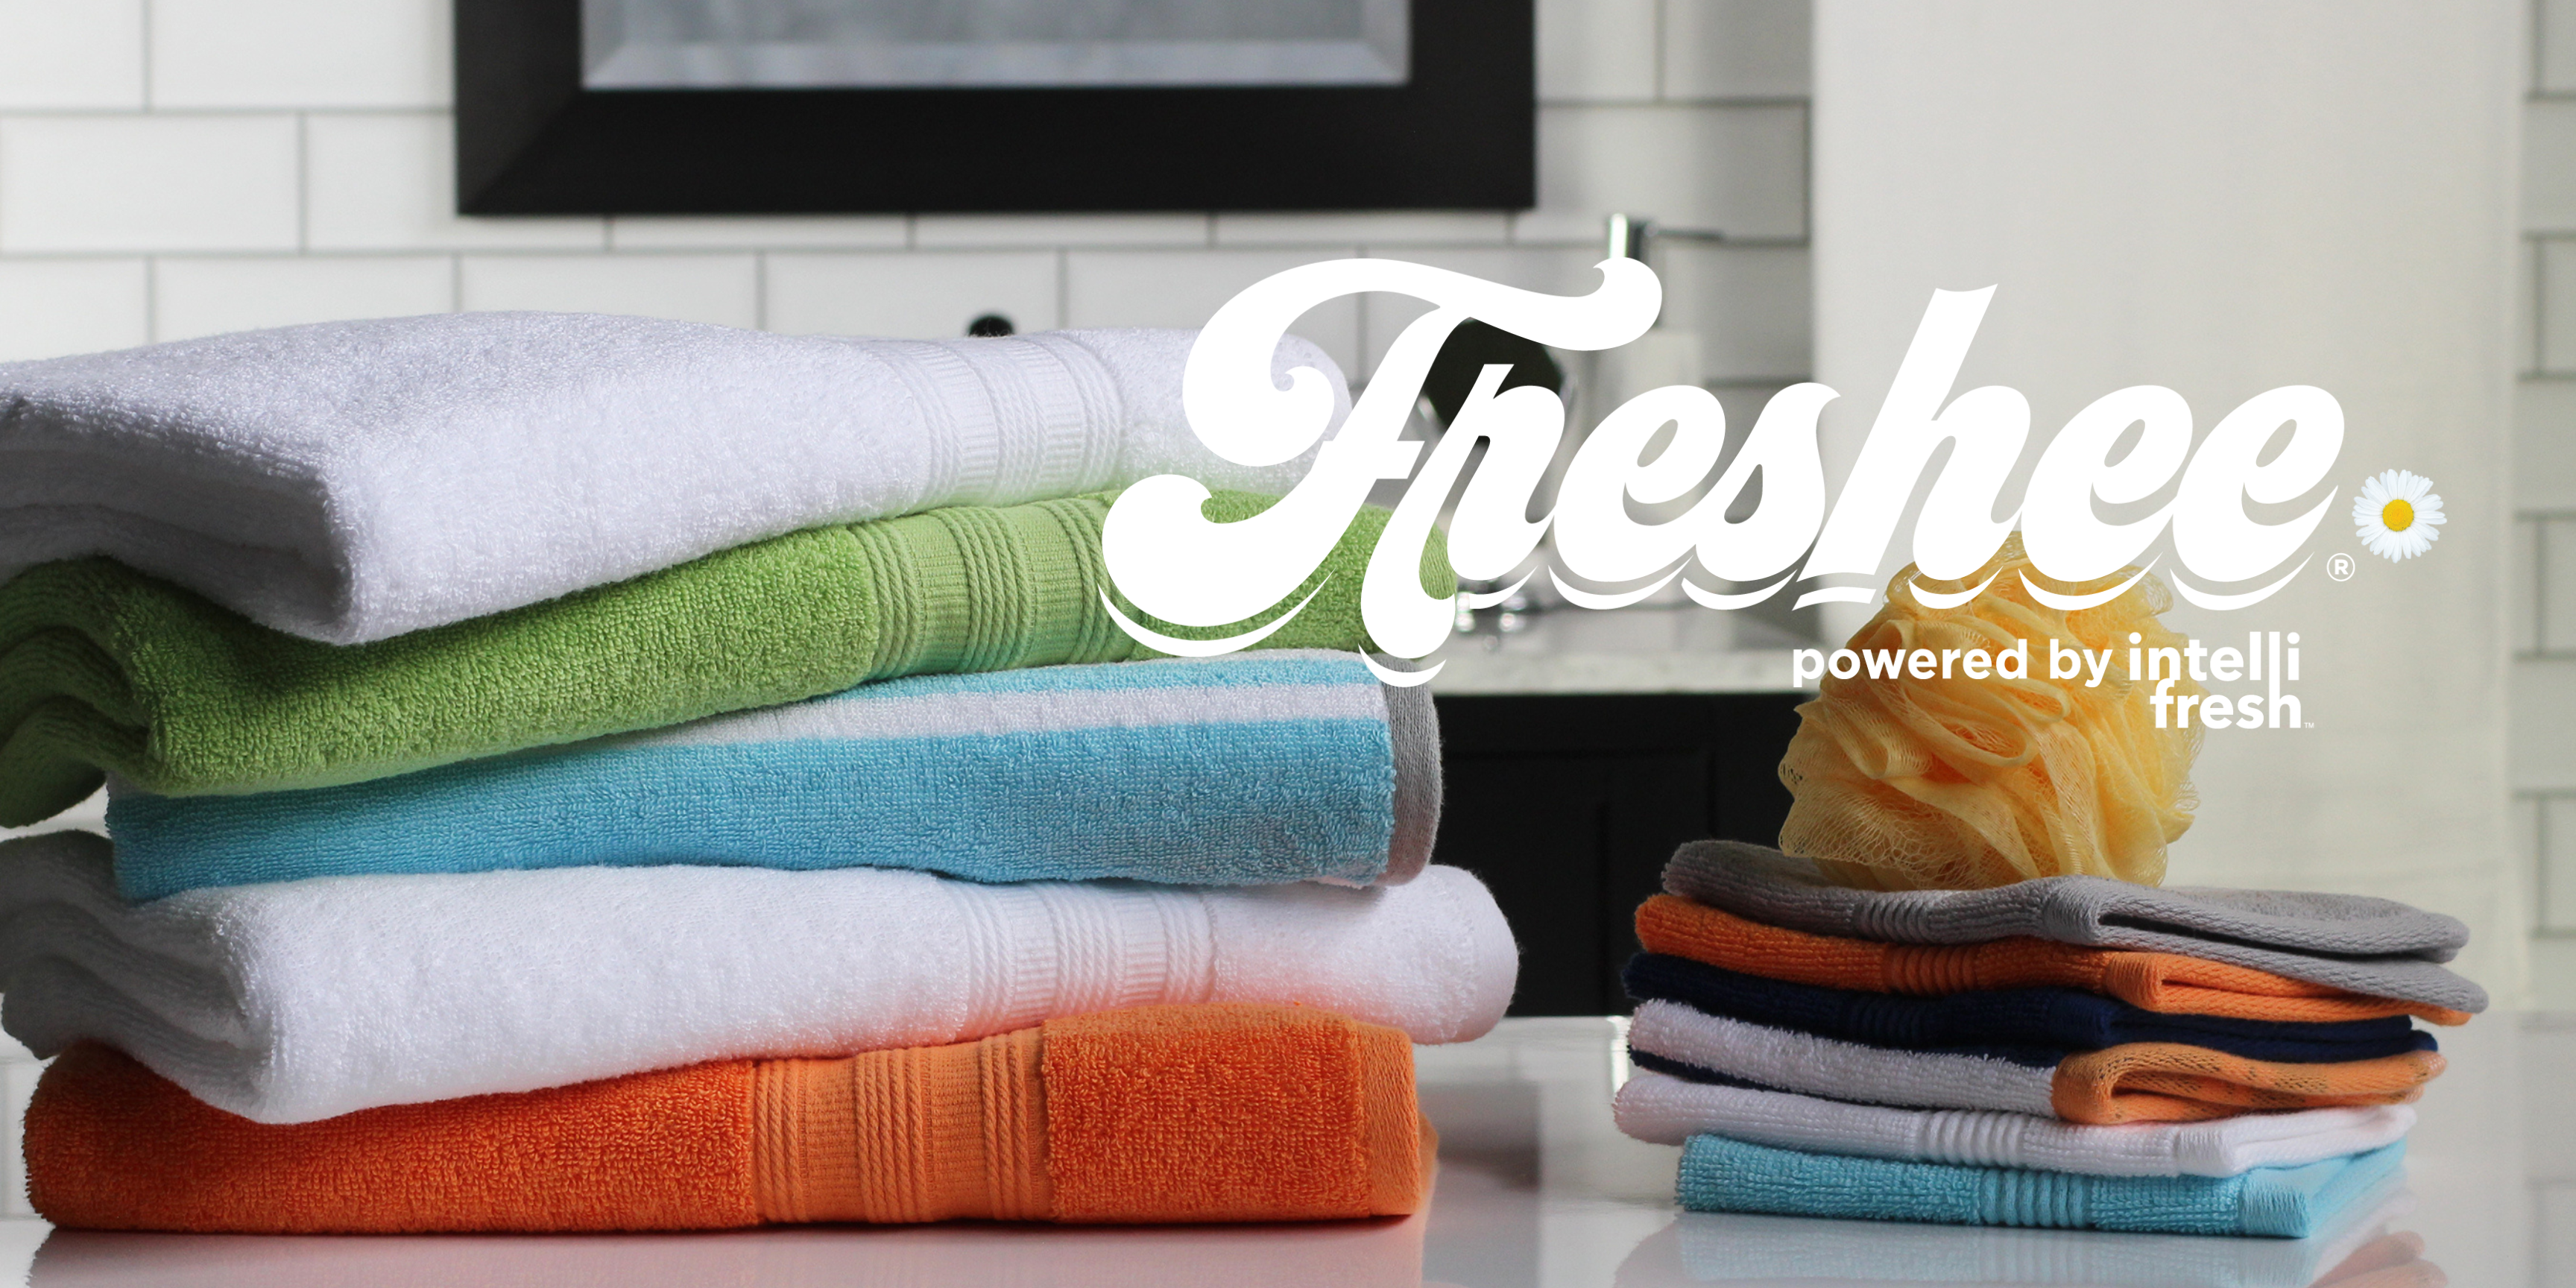 Boll & Branch Adds Premium Bath Towel Line to Their Fair Trade Certified  Arsenal